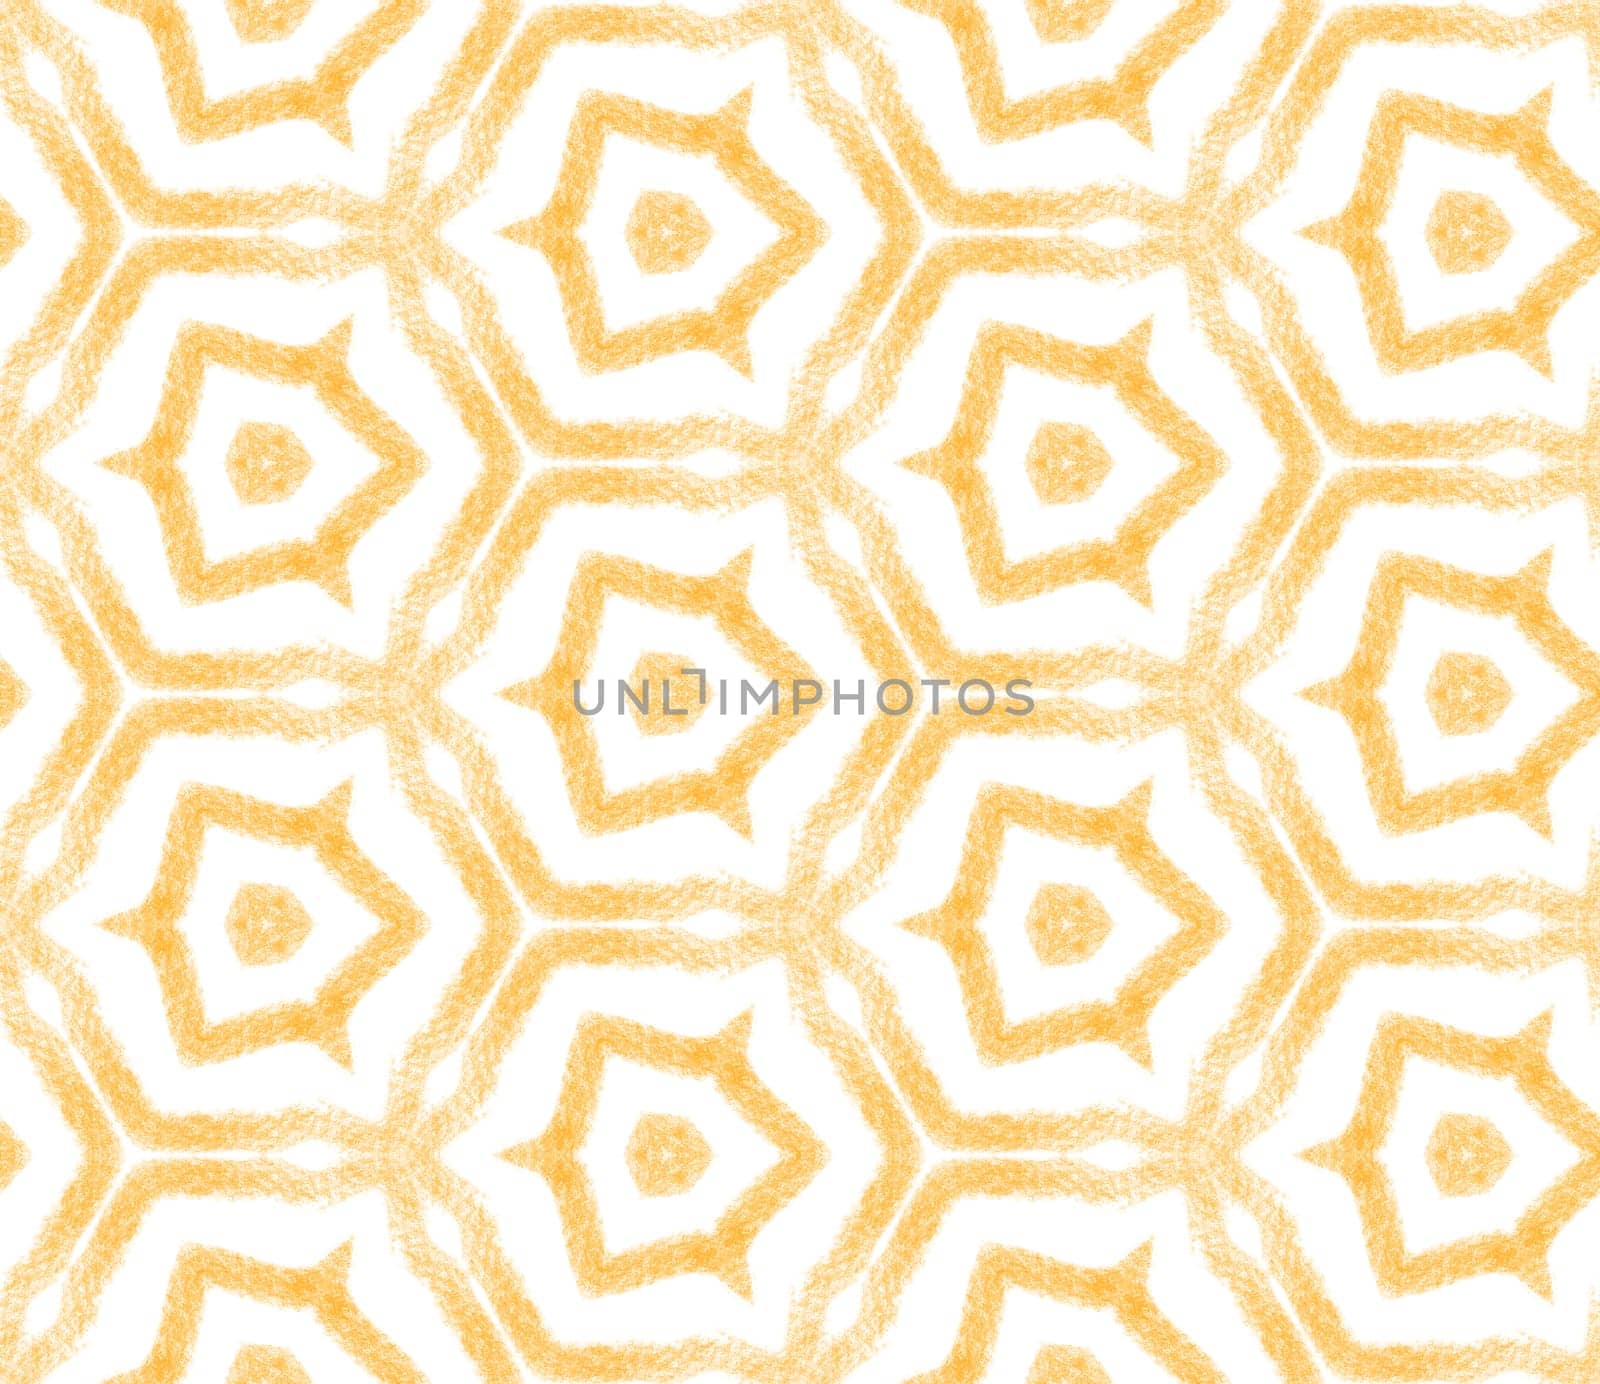 Ethnic hand painted pattern. Yellow symmetrical kaleidoscope background. Summer dress ethnic hand painted tile. Textile ready fair print, swimwear fabric, wallpaper, wrapping.